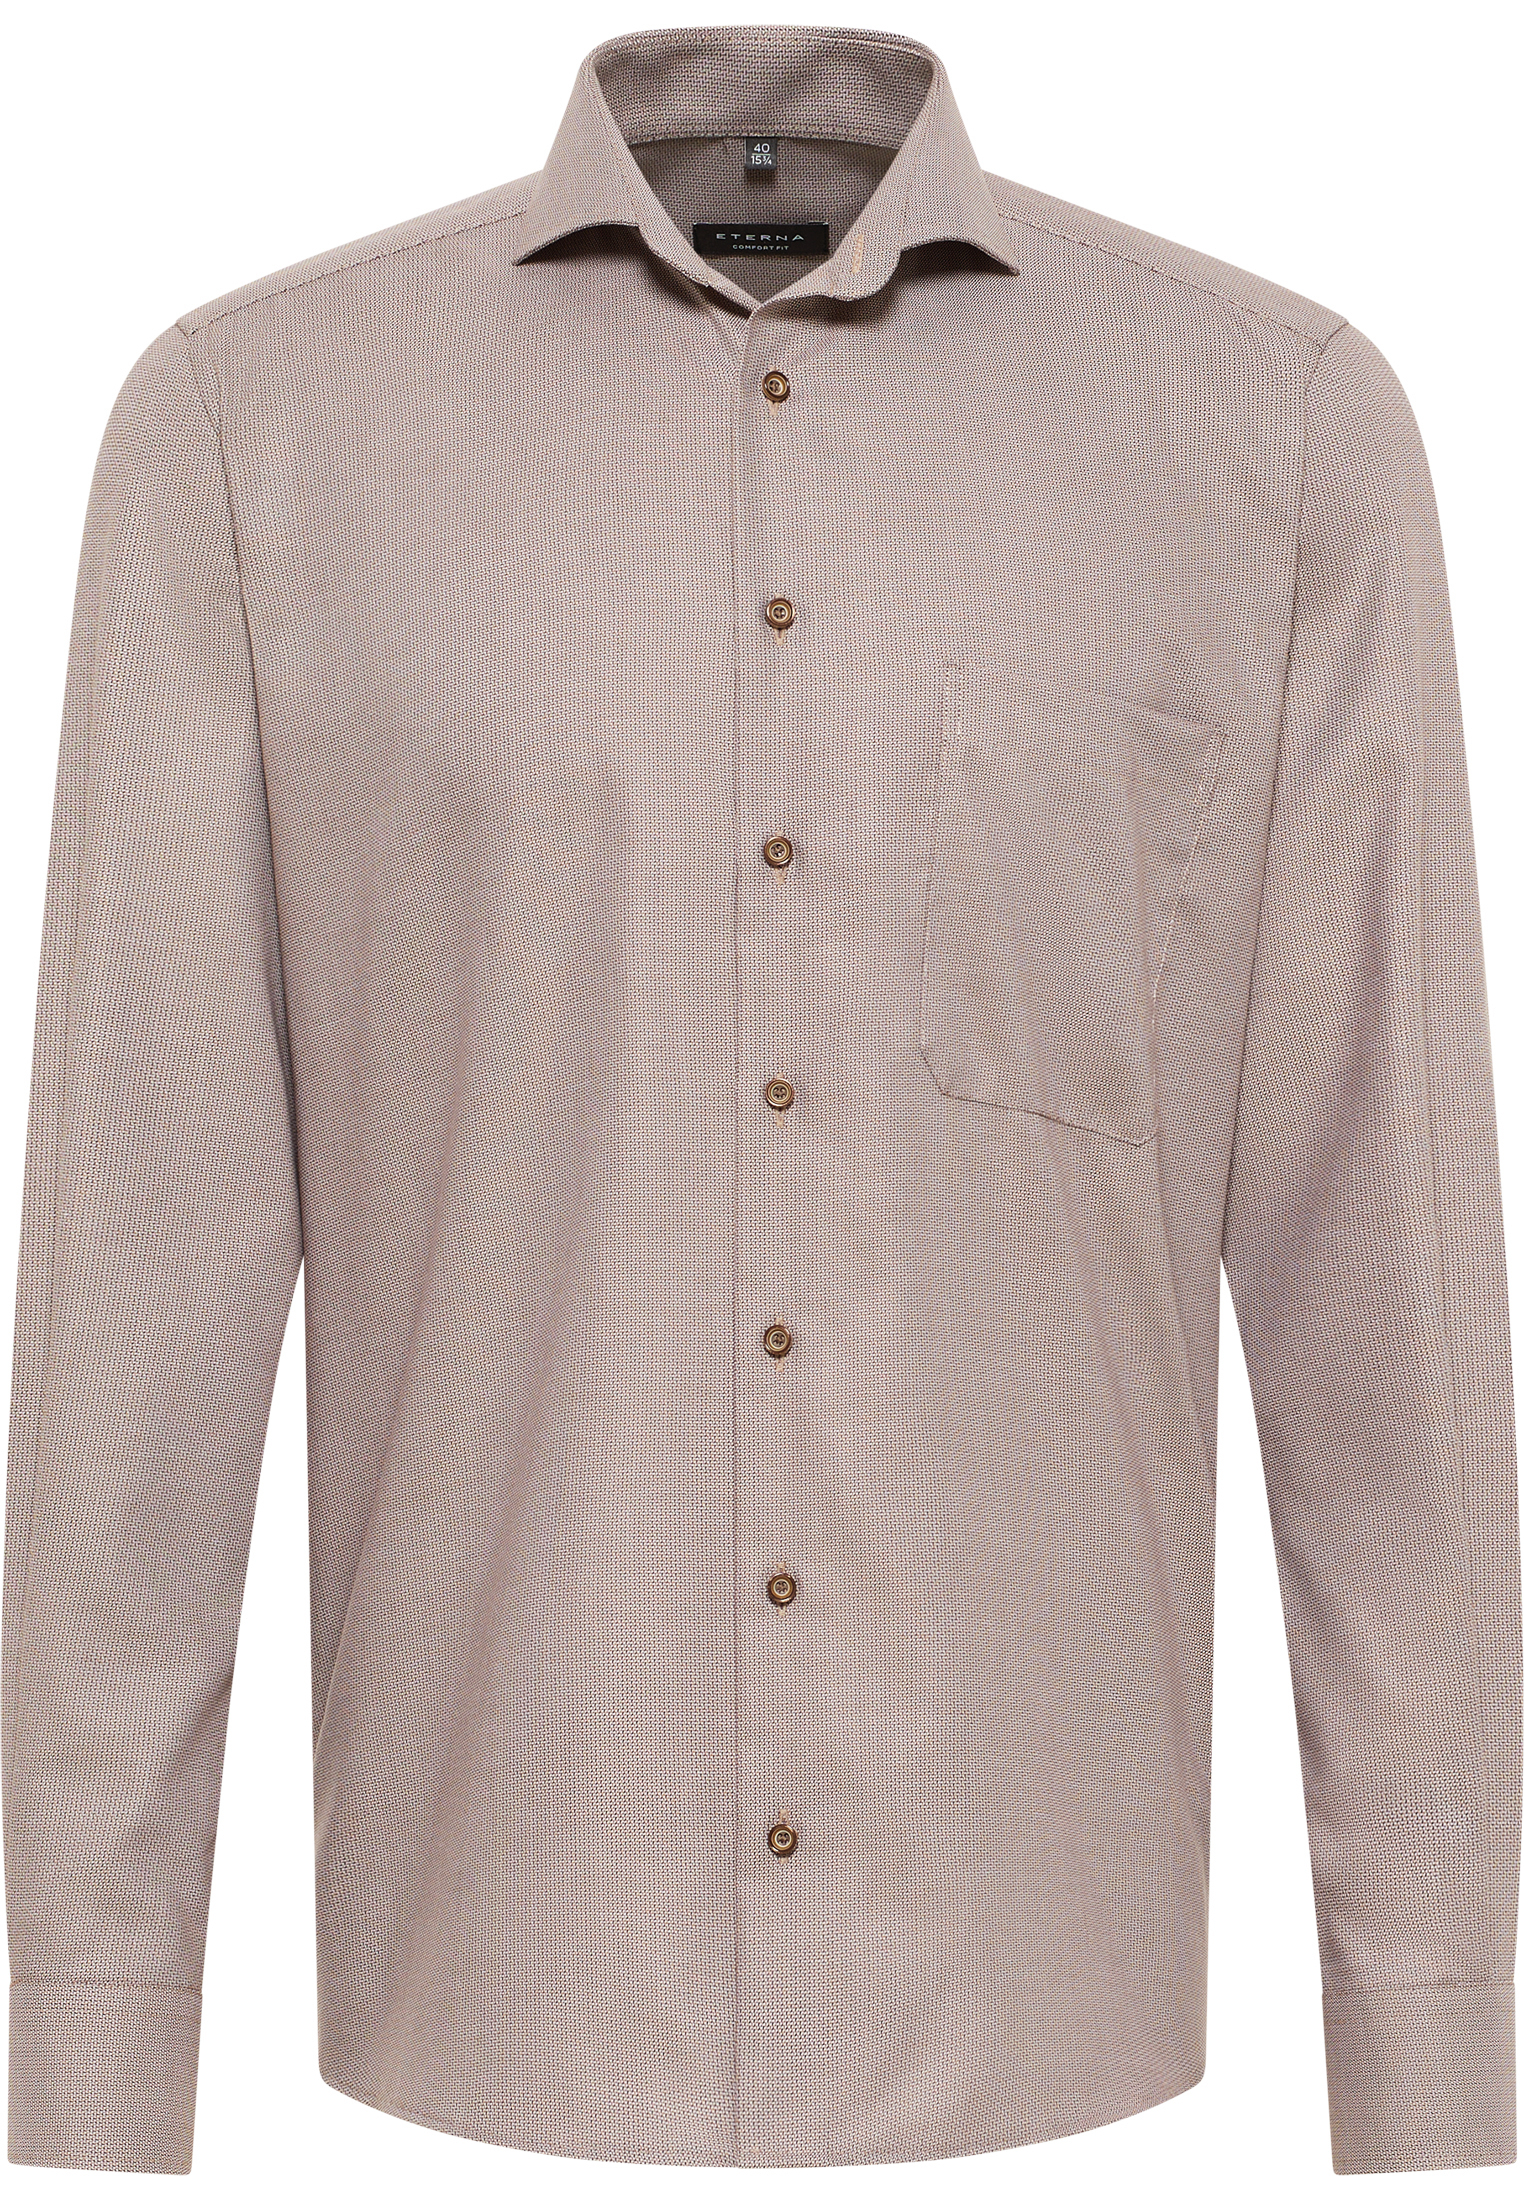 COMFORT FIT Shirt in taupe structured